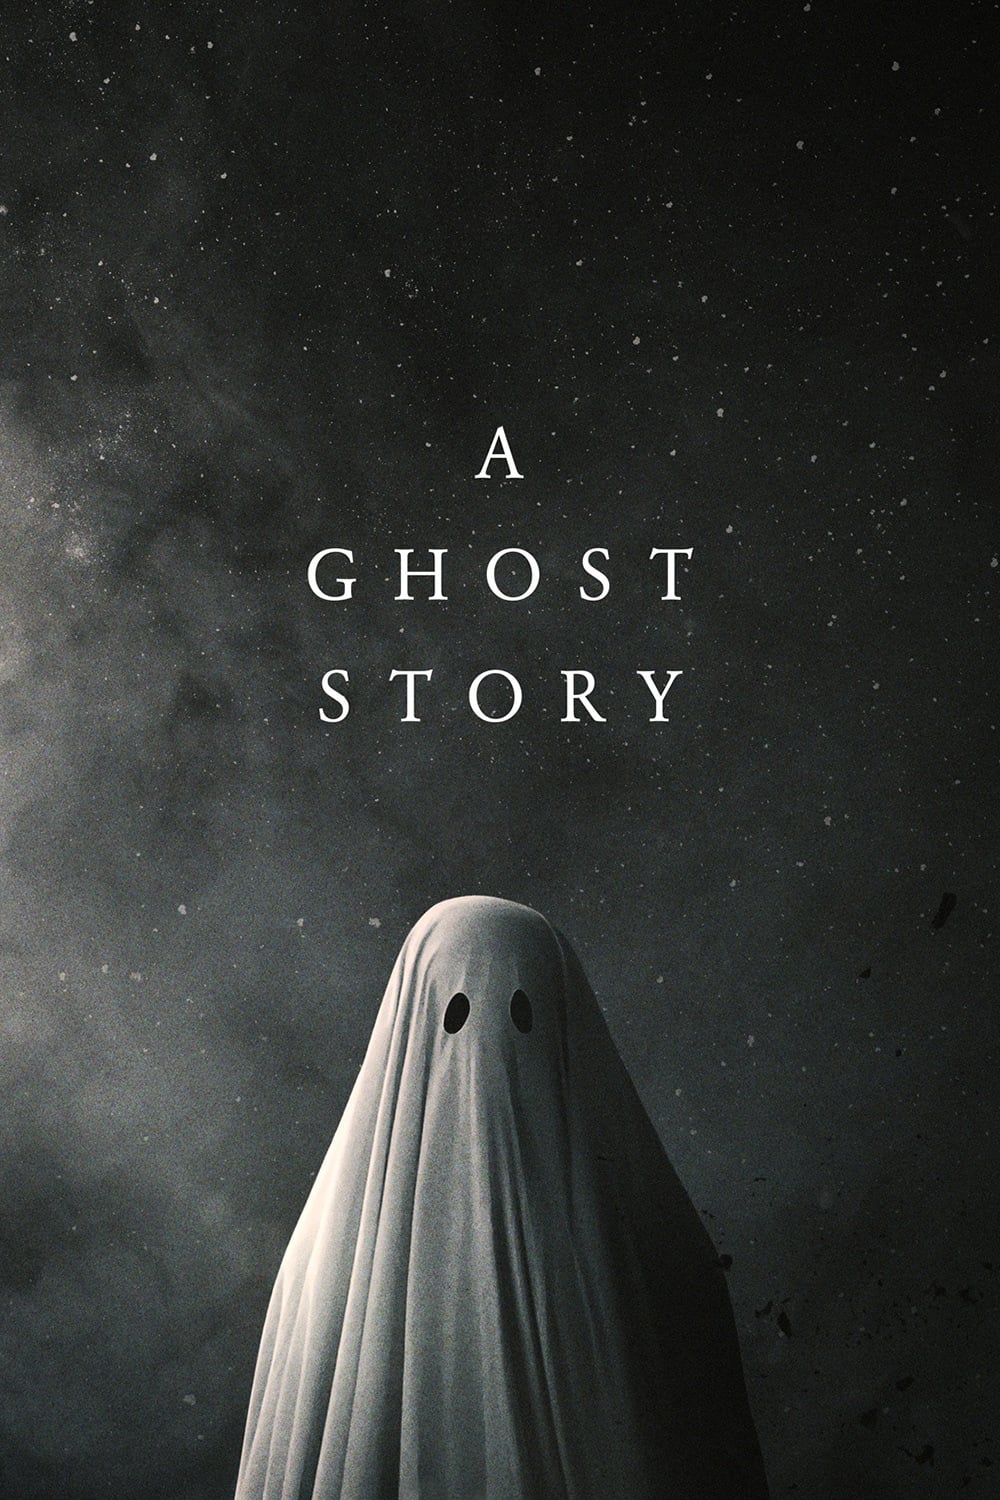 Poster for the movie "A Ghost Story"